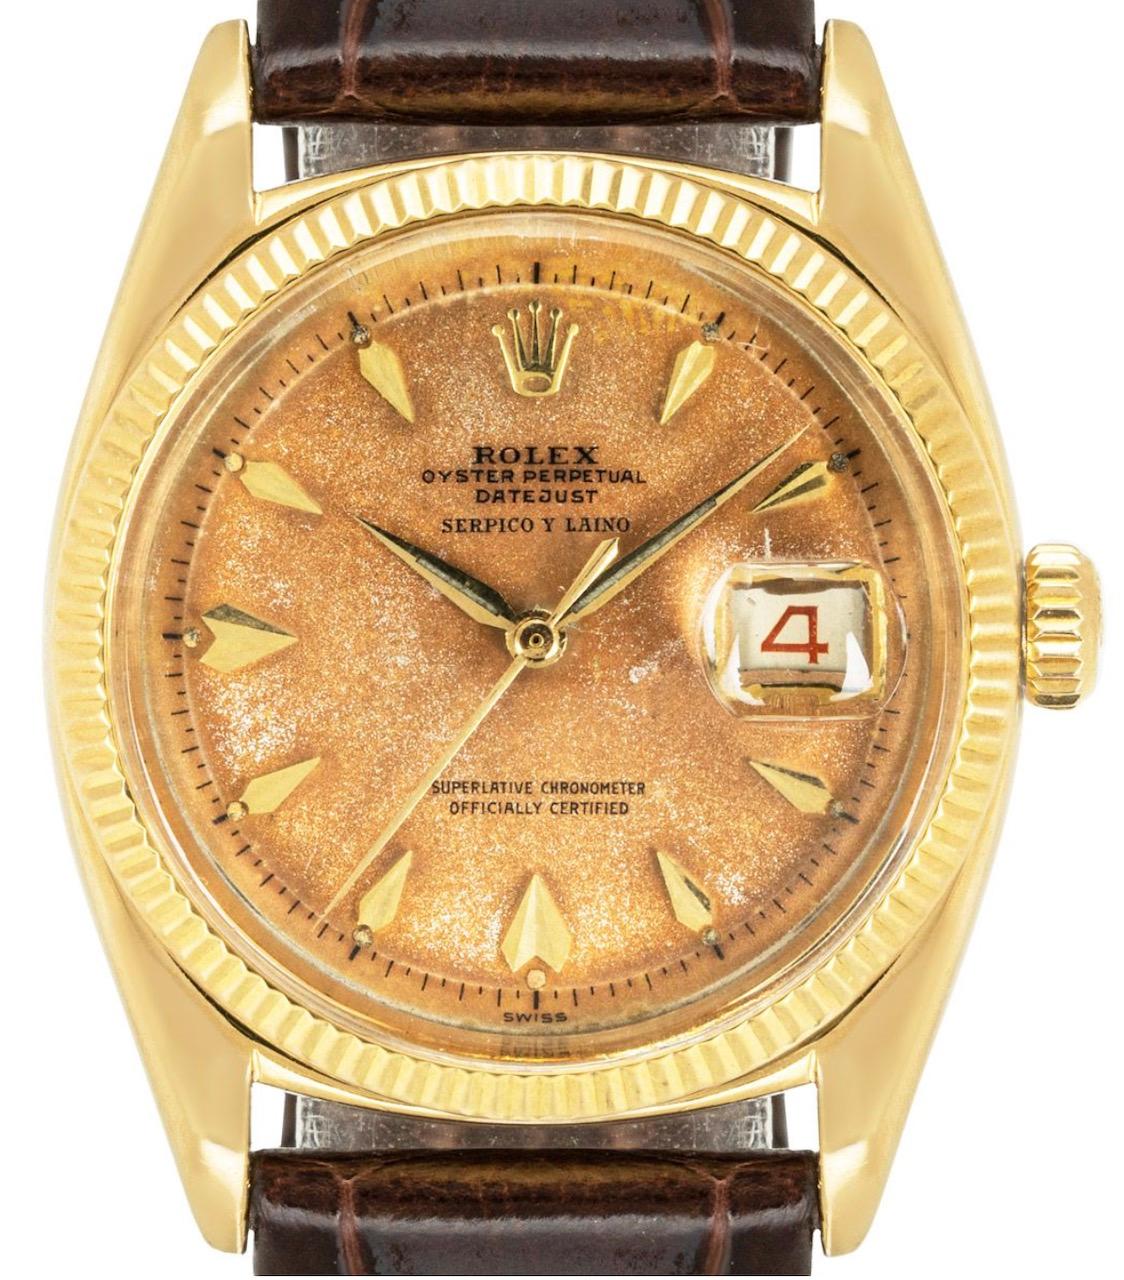 A stunning vintage Rolex Datejust in yellow gold with a unique Patina dial signed by Serpico y Laino at 12 o'clock. Featuring applied dagger hour markers and a red and black roulette date wheel, with an open 6 and 9.

This timepiece was originally